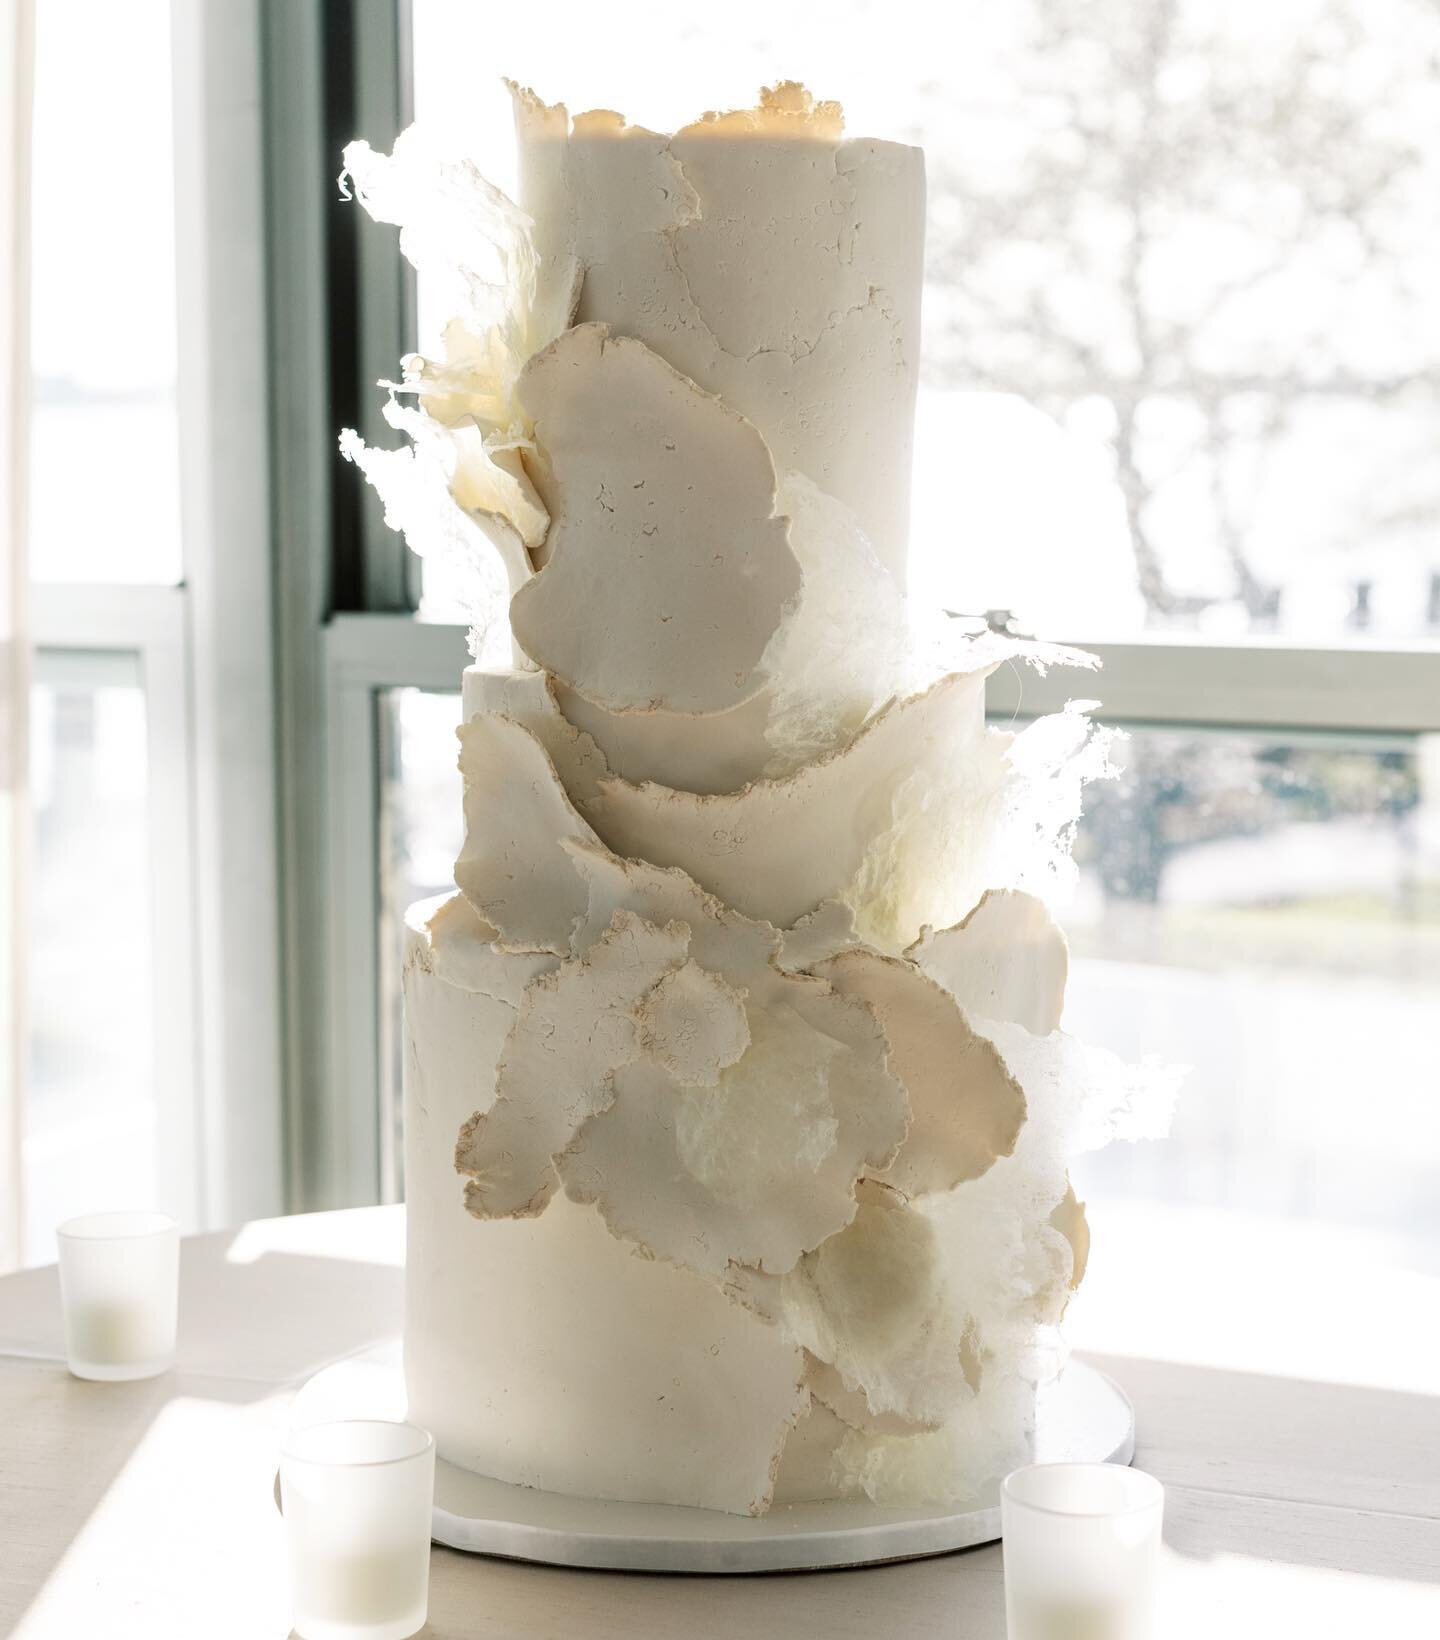 Normally a backlit cake isn&rsquo;t ideal, but @ashergardner_ managed to make this golden hour angel appear ✨